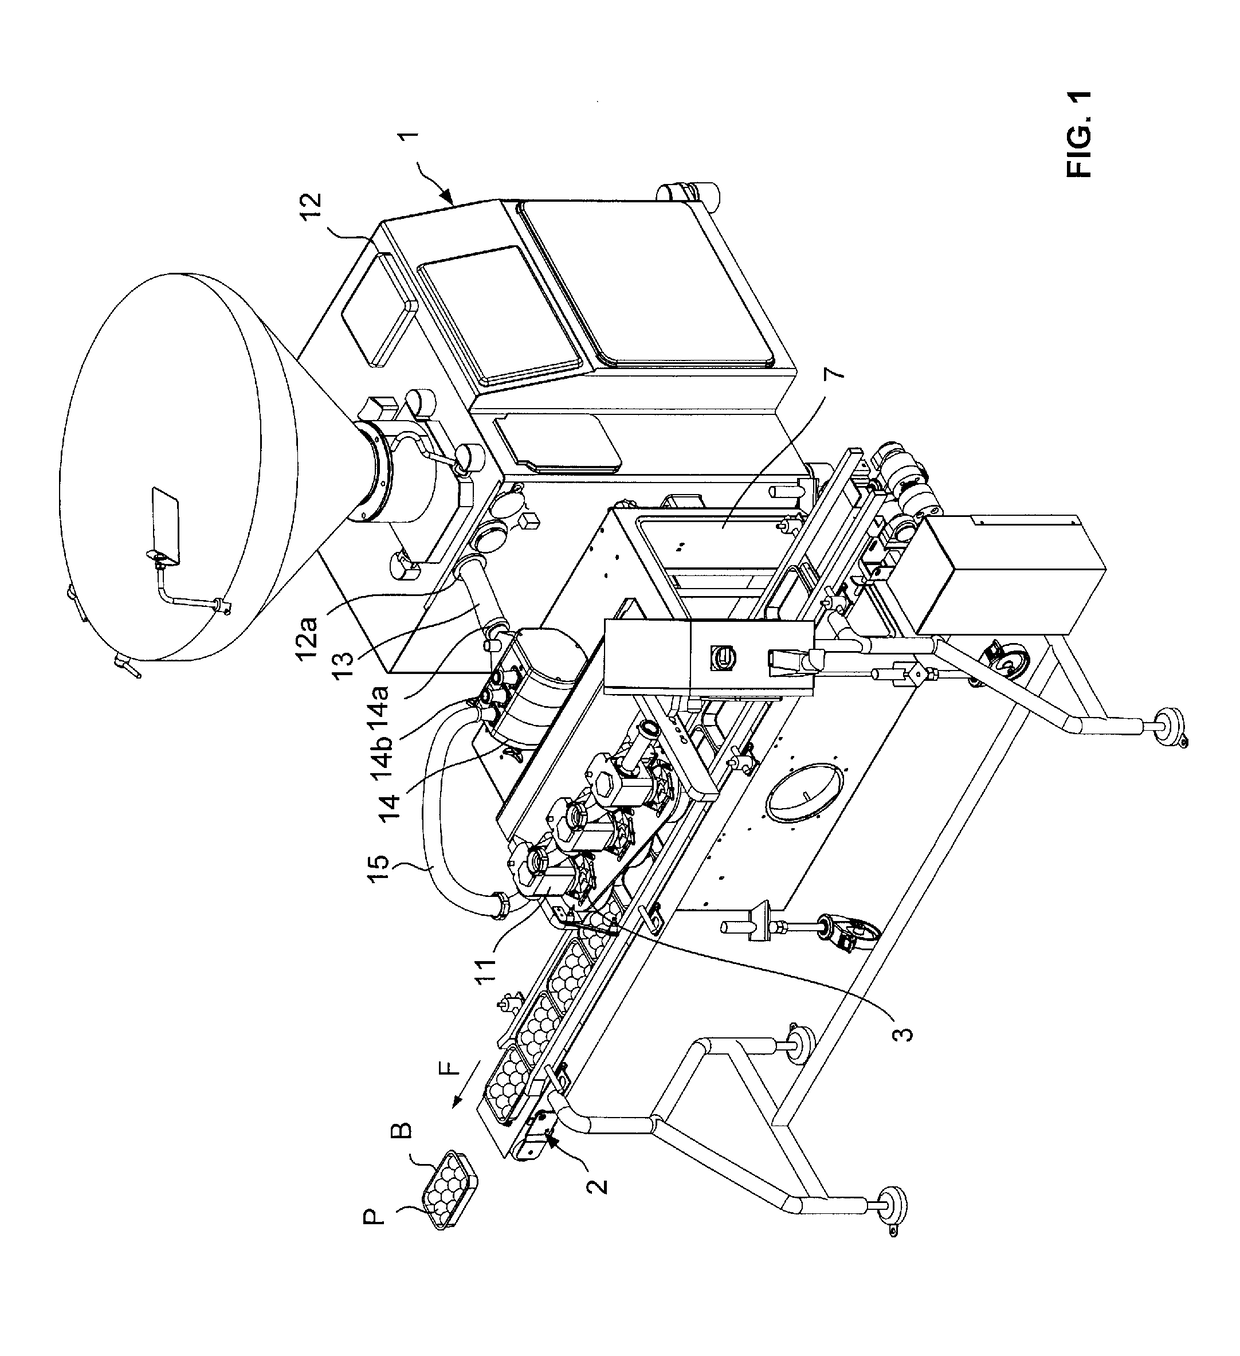 Method and machine for the production of portions, including means for ejecting said portions